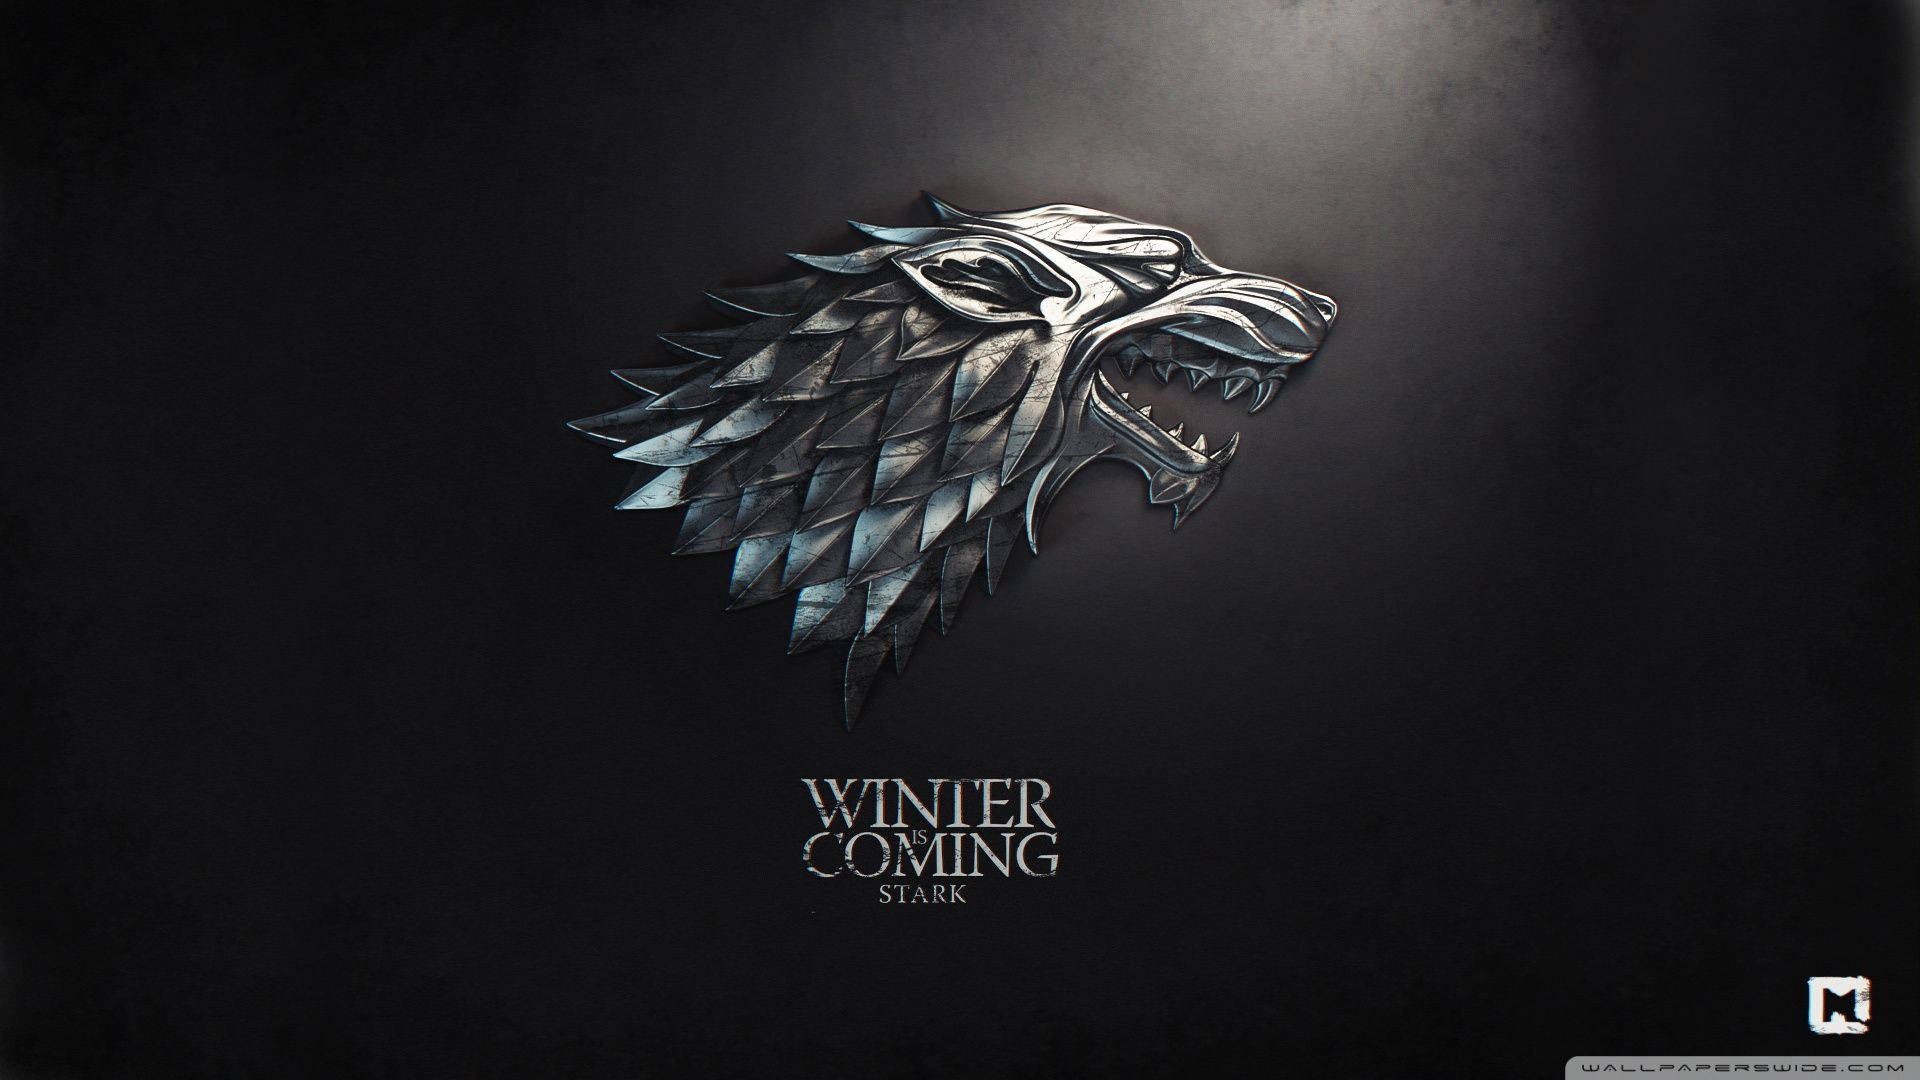 Cool Hd Logo In Game Of Thrones